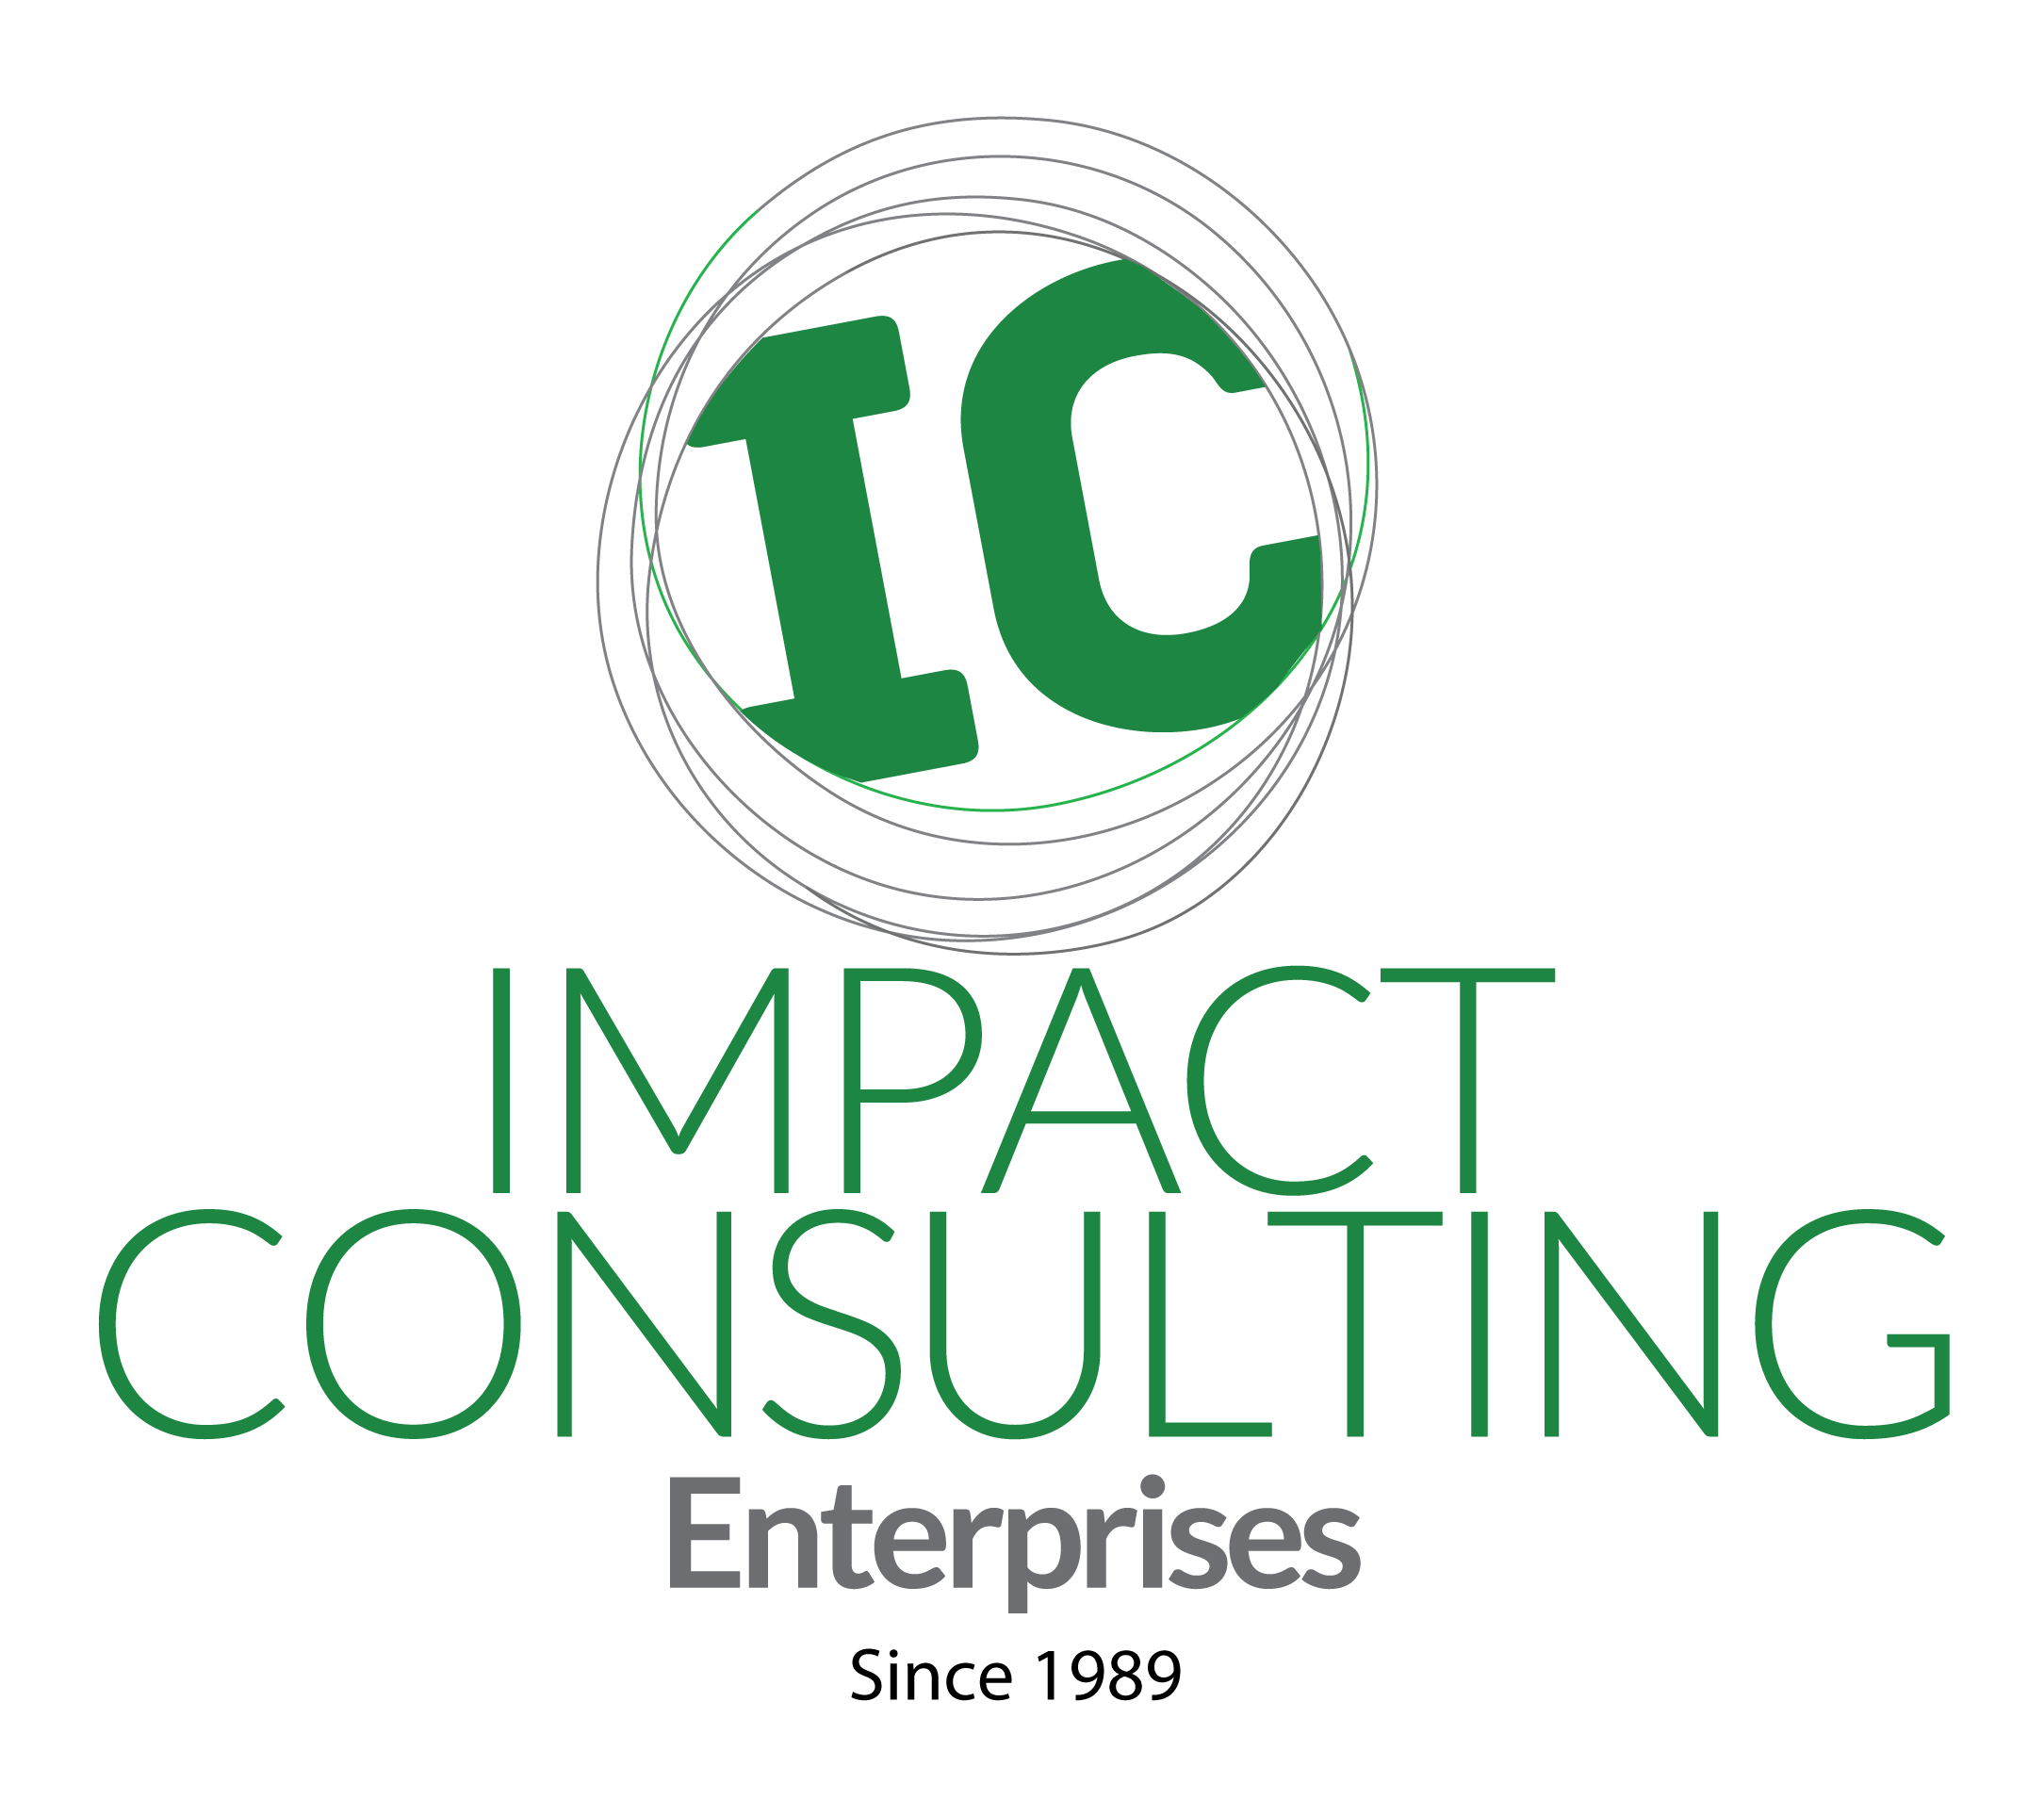 About Impact Consulting